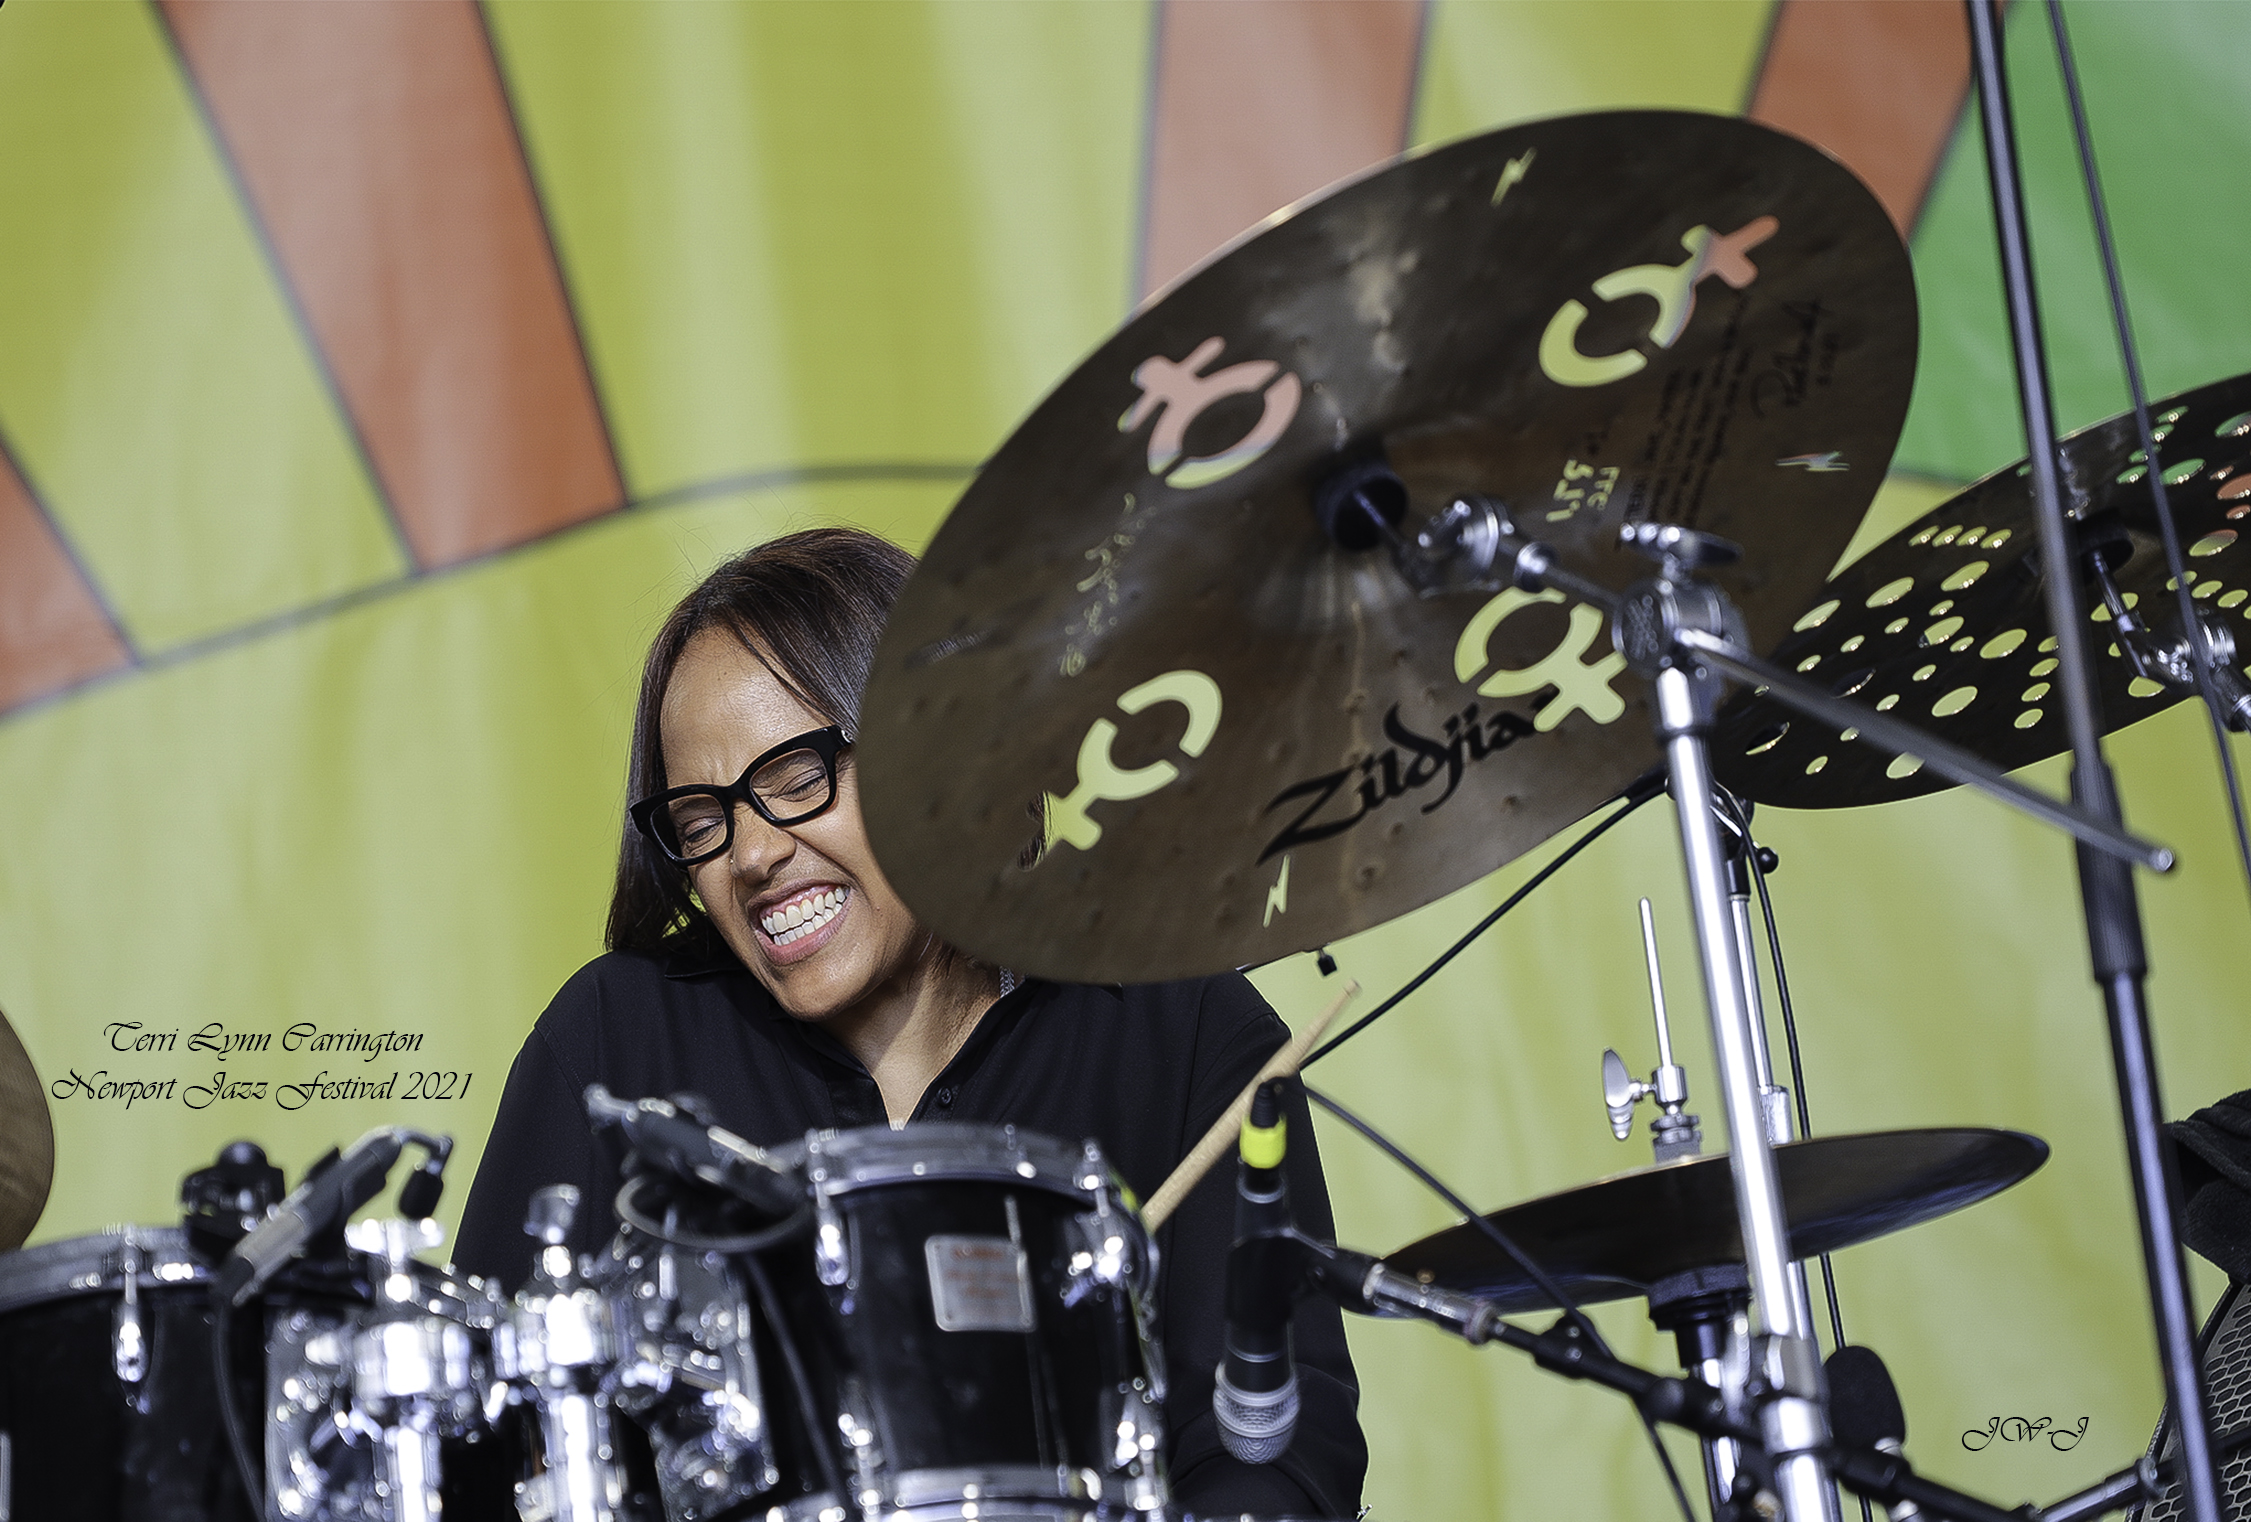 Tony Lynn Carrington behind her drum-set performing at the Newport Jazz Festival, big smile on her face and deeply entranced with the music